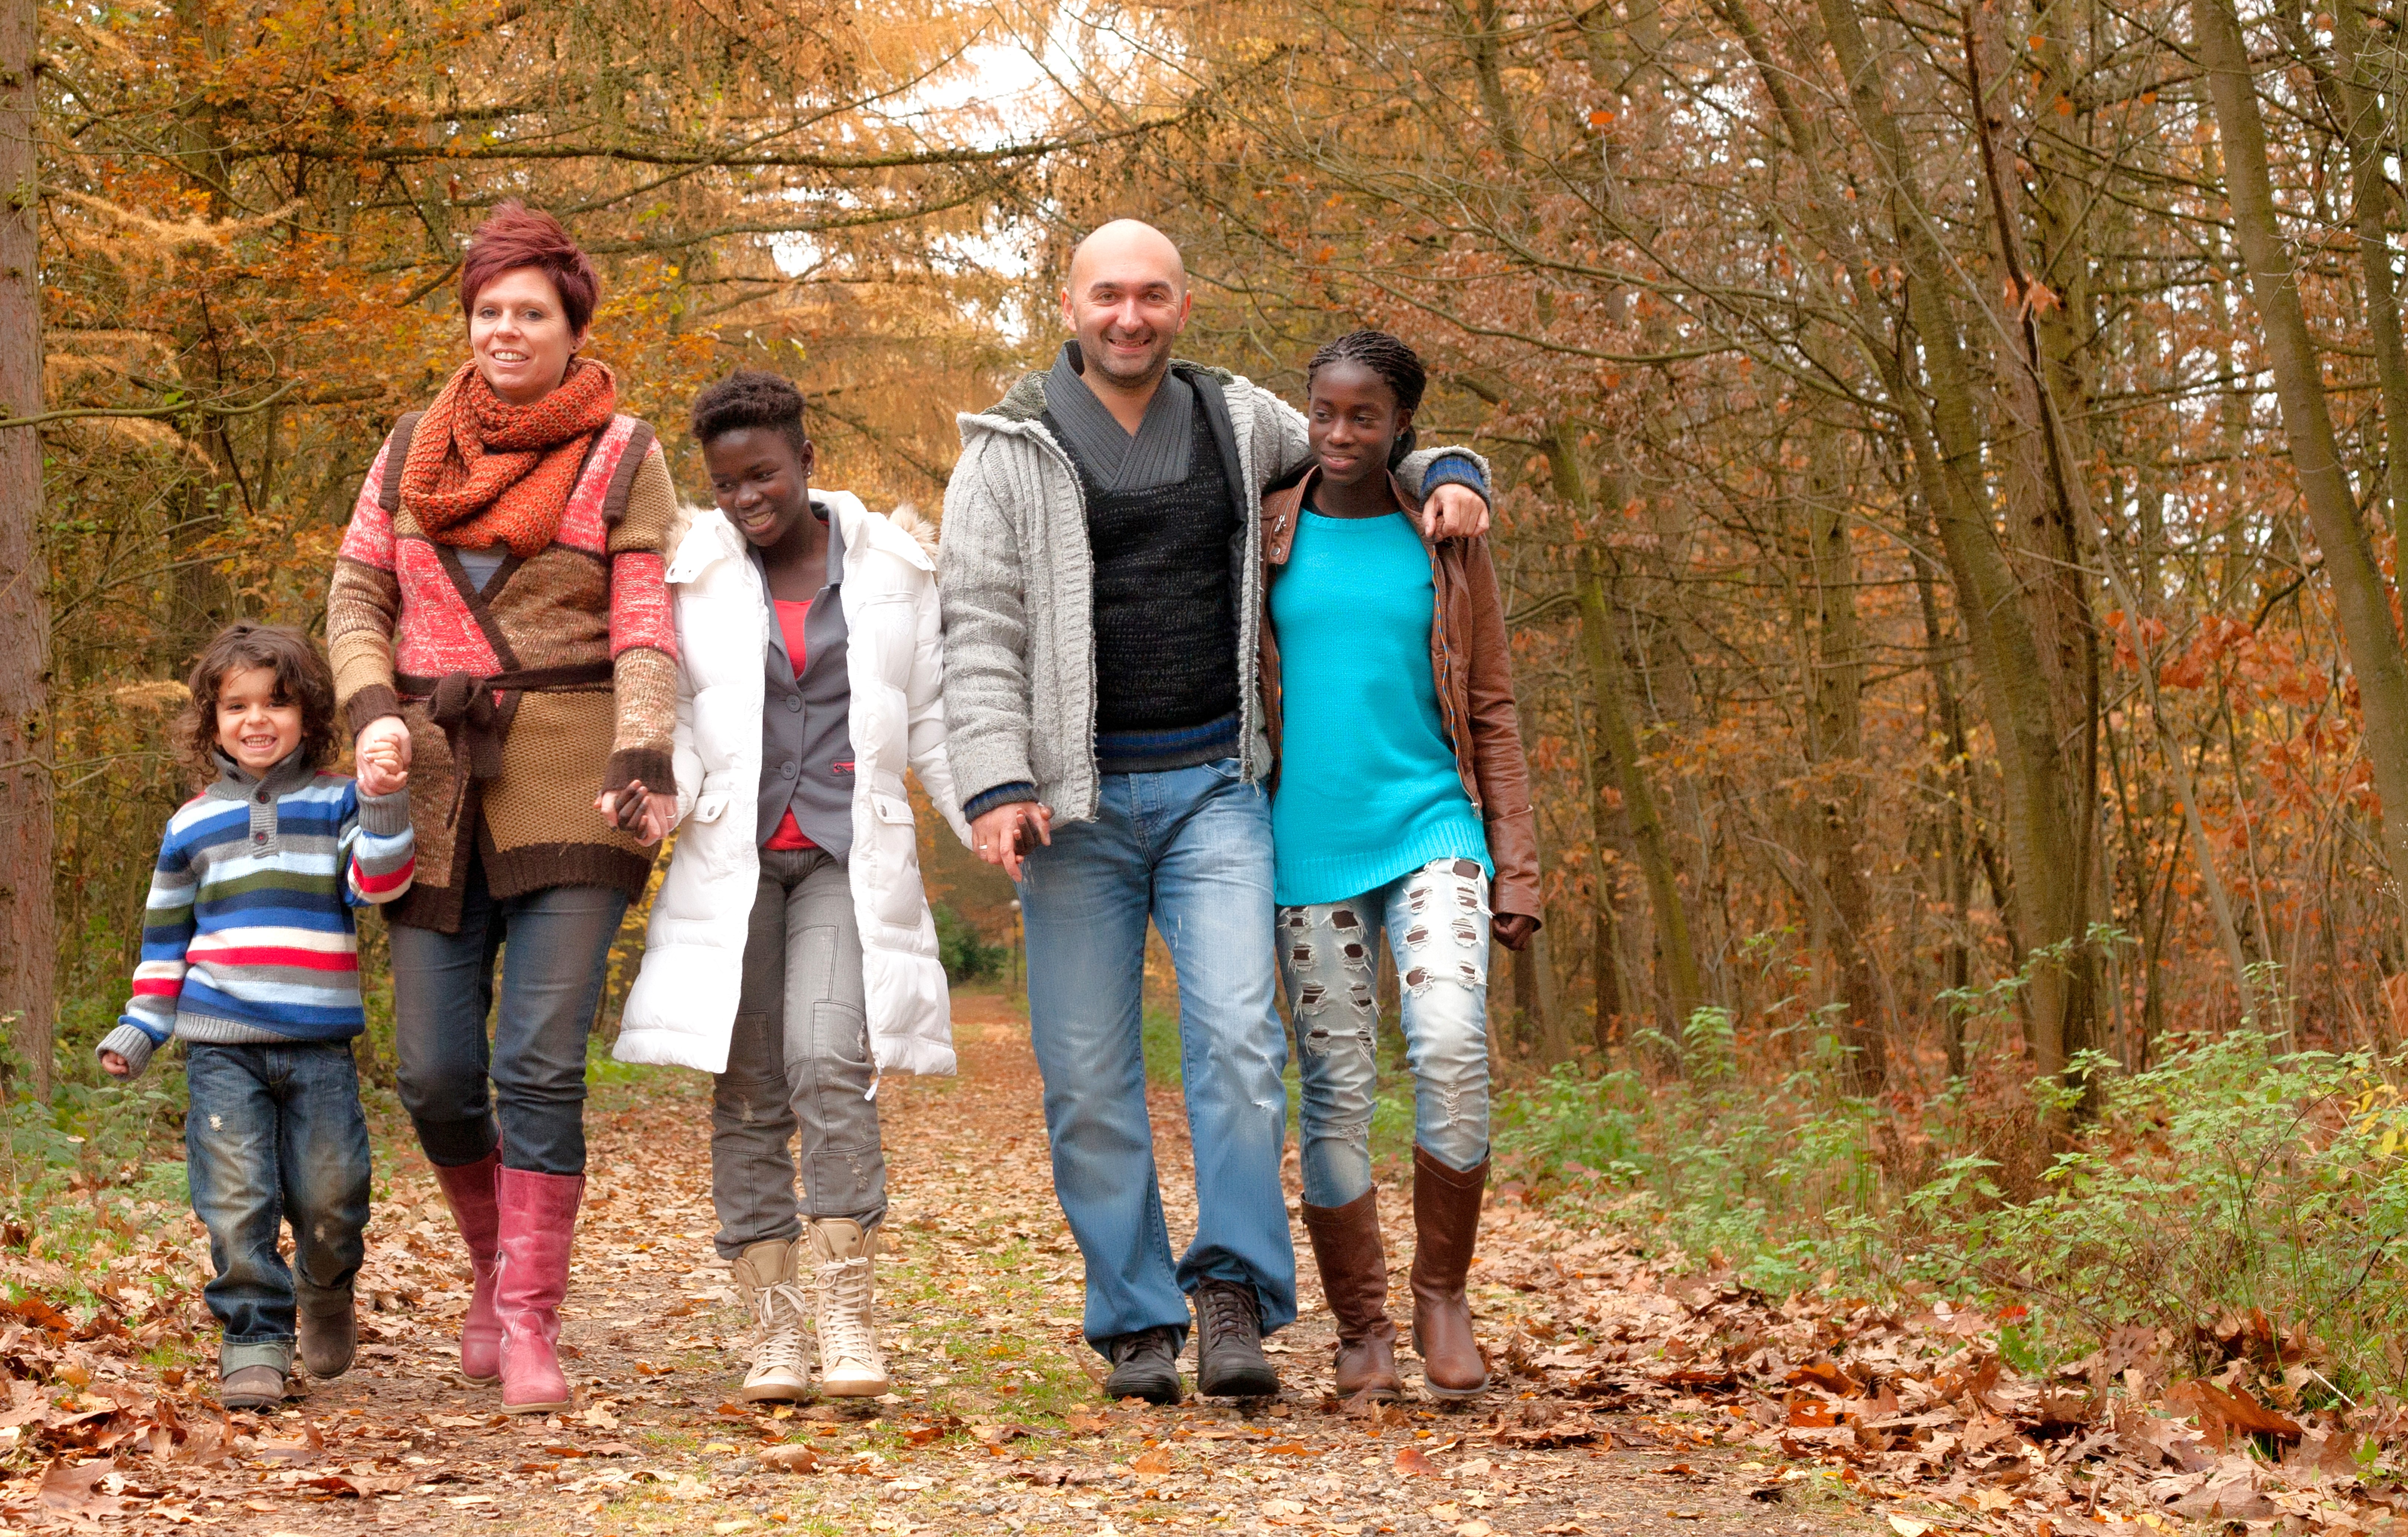 A resource family of 2 adults and three children walk through a forest.